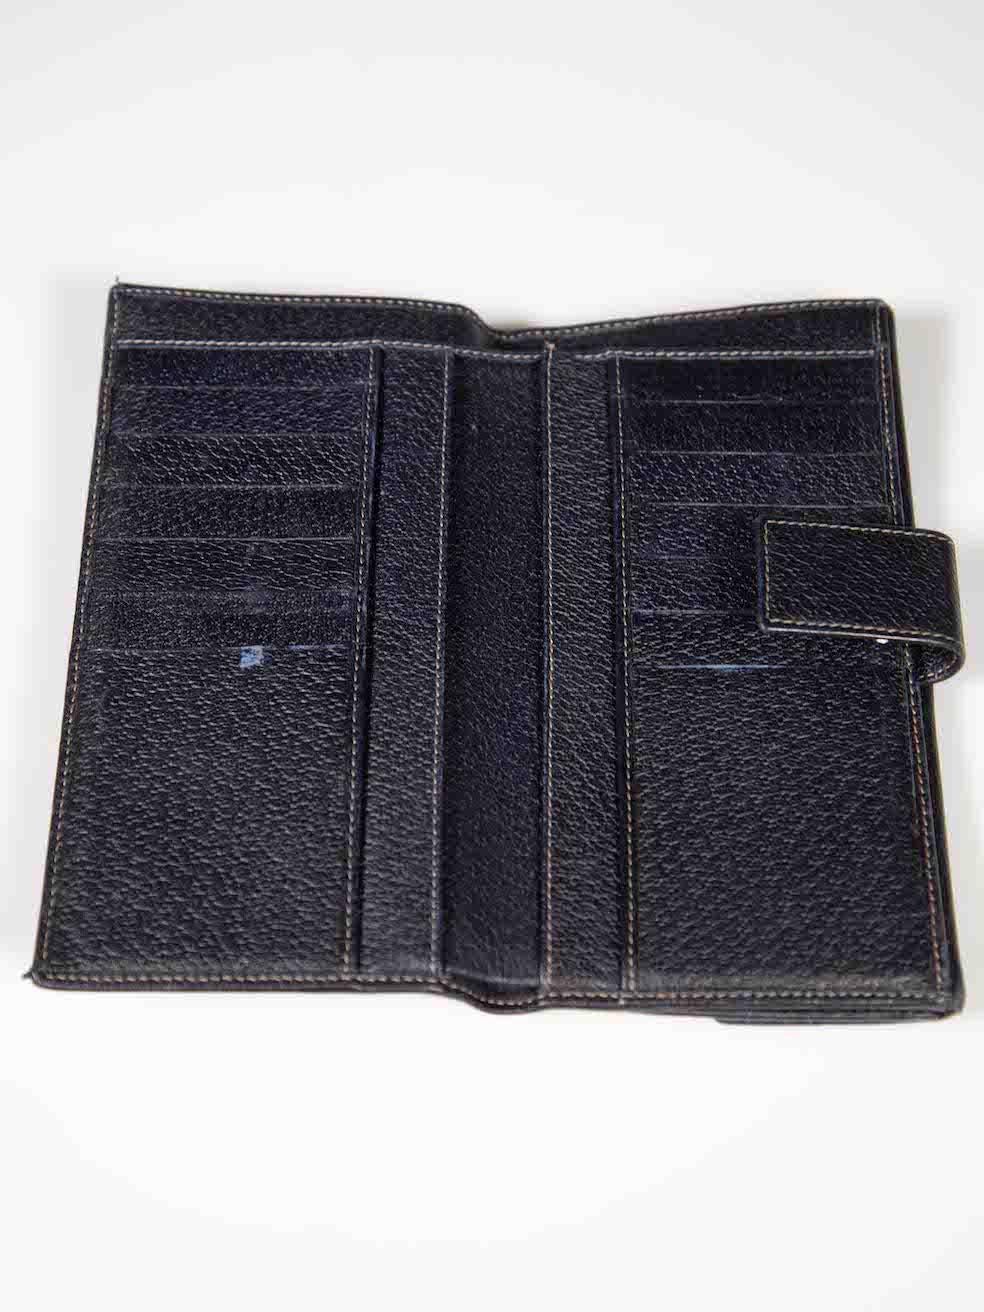 Gucci Navy Leather Long Wallet For Sale 1